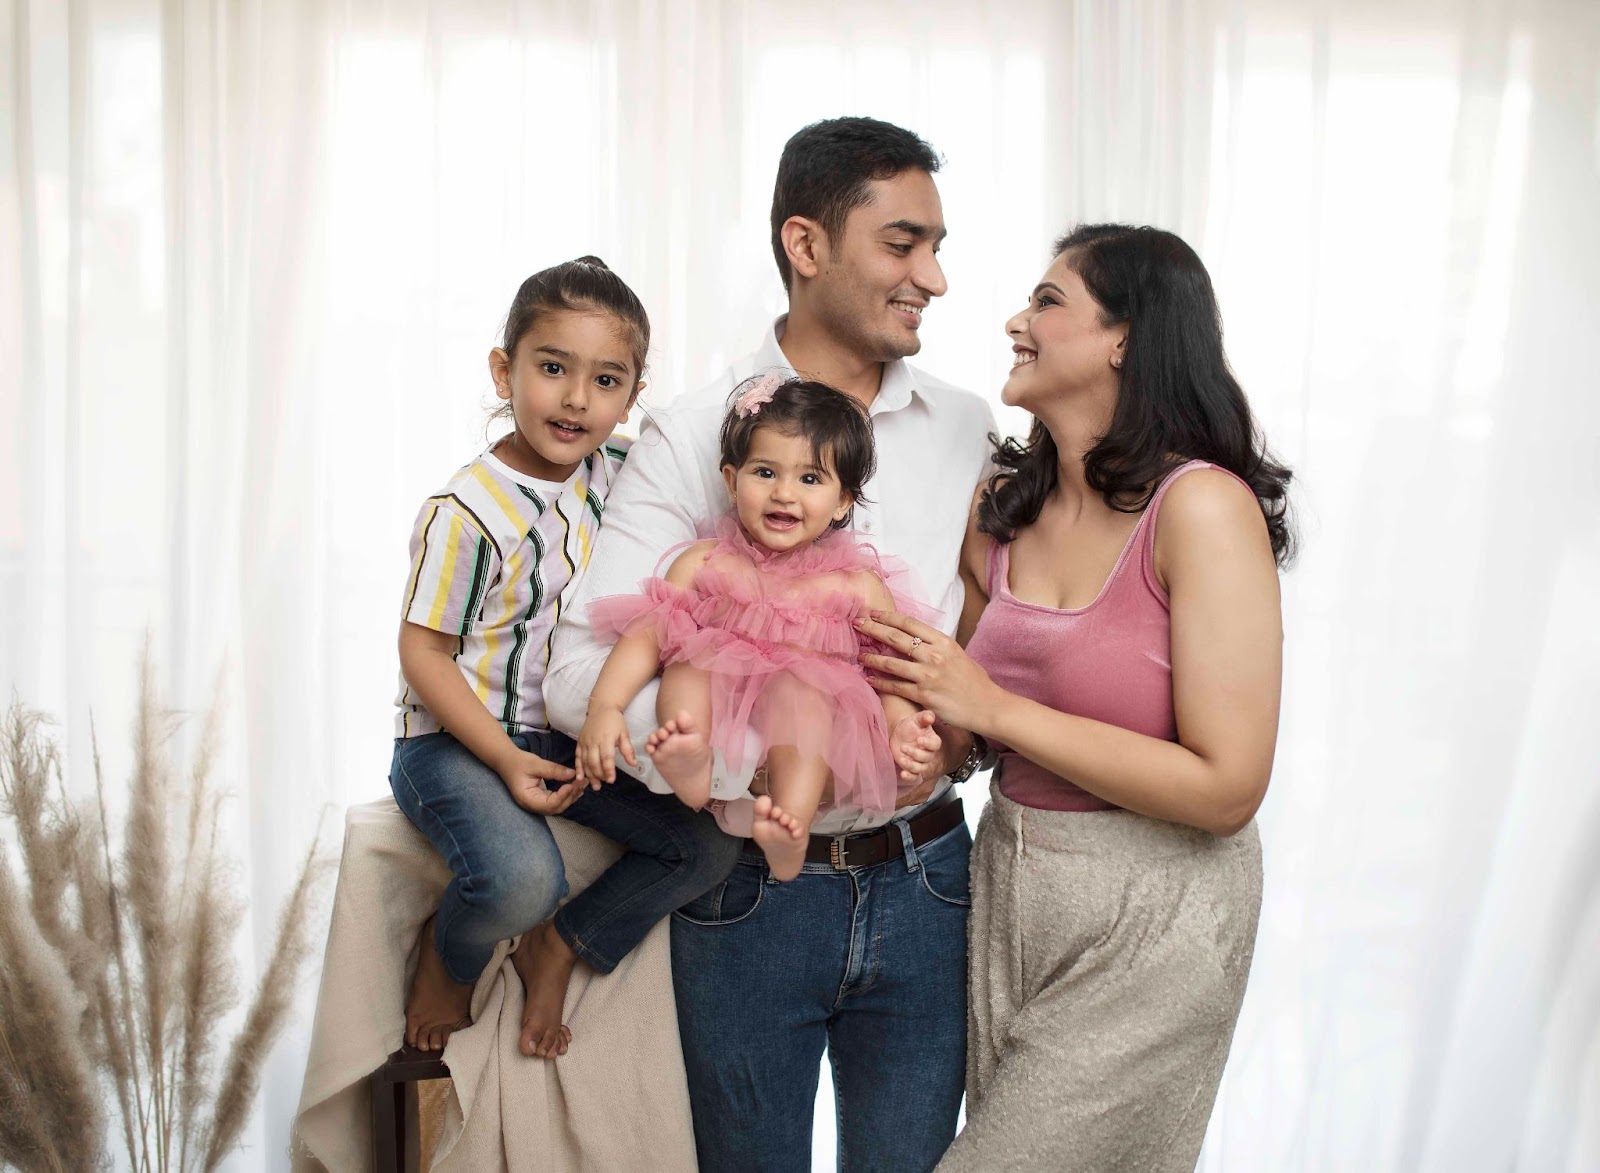 Book your Family Photoshoot with Ambica Photography, mix of candid moments and family portraits Family portrait photography in Bangalore, family photographers